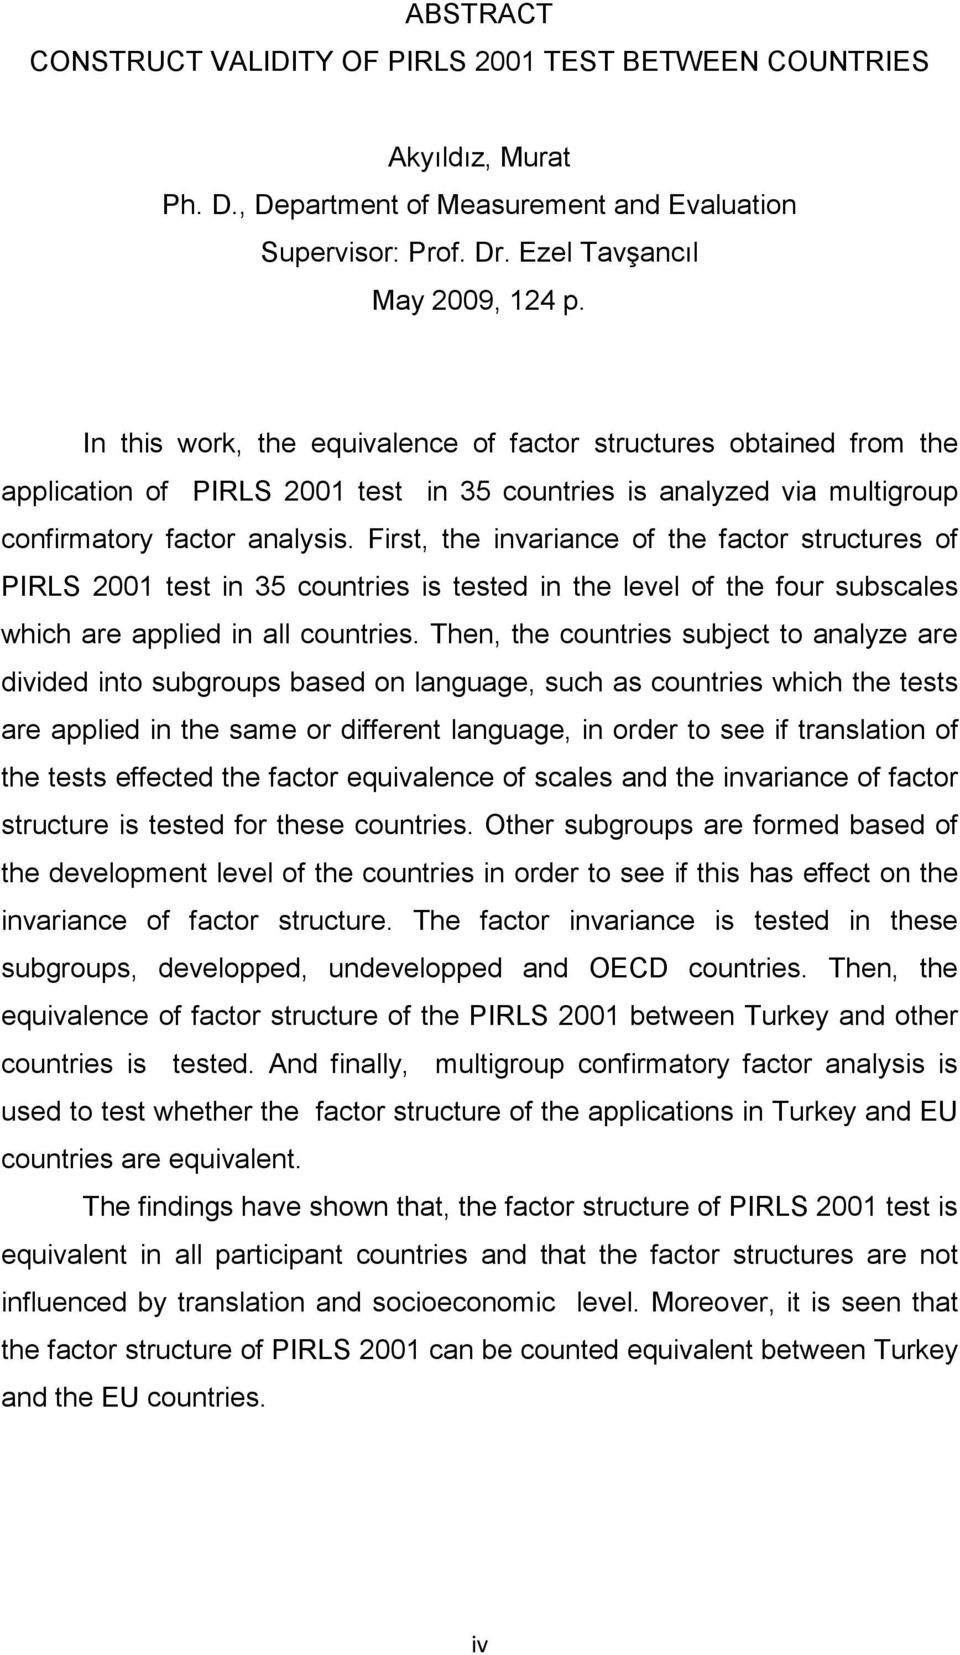 First, the invariance of the factor structures of PIRLS 2001 test in 35 countries is tested in the level of the four subscales which are applied in all countries.